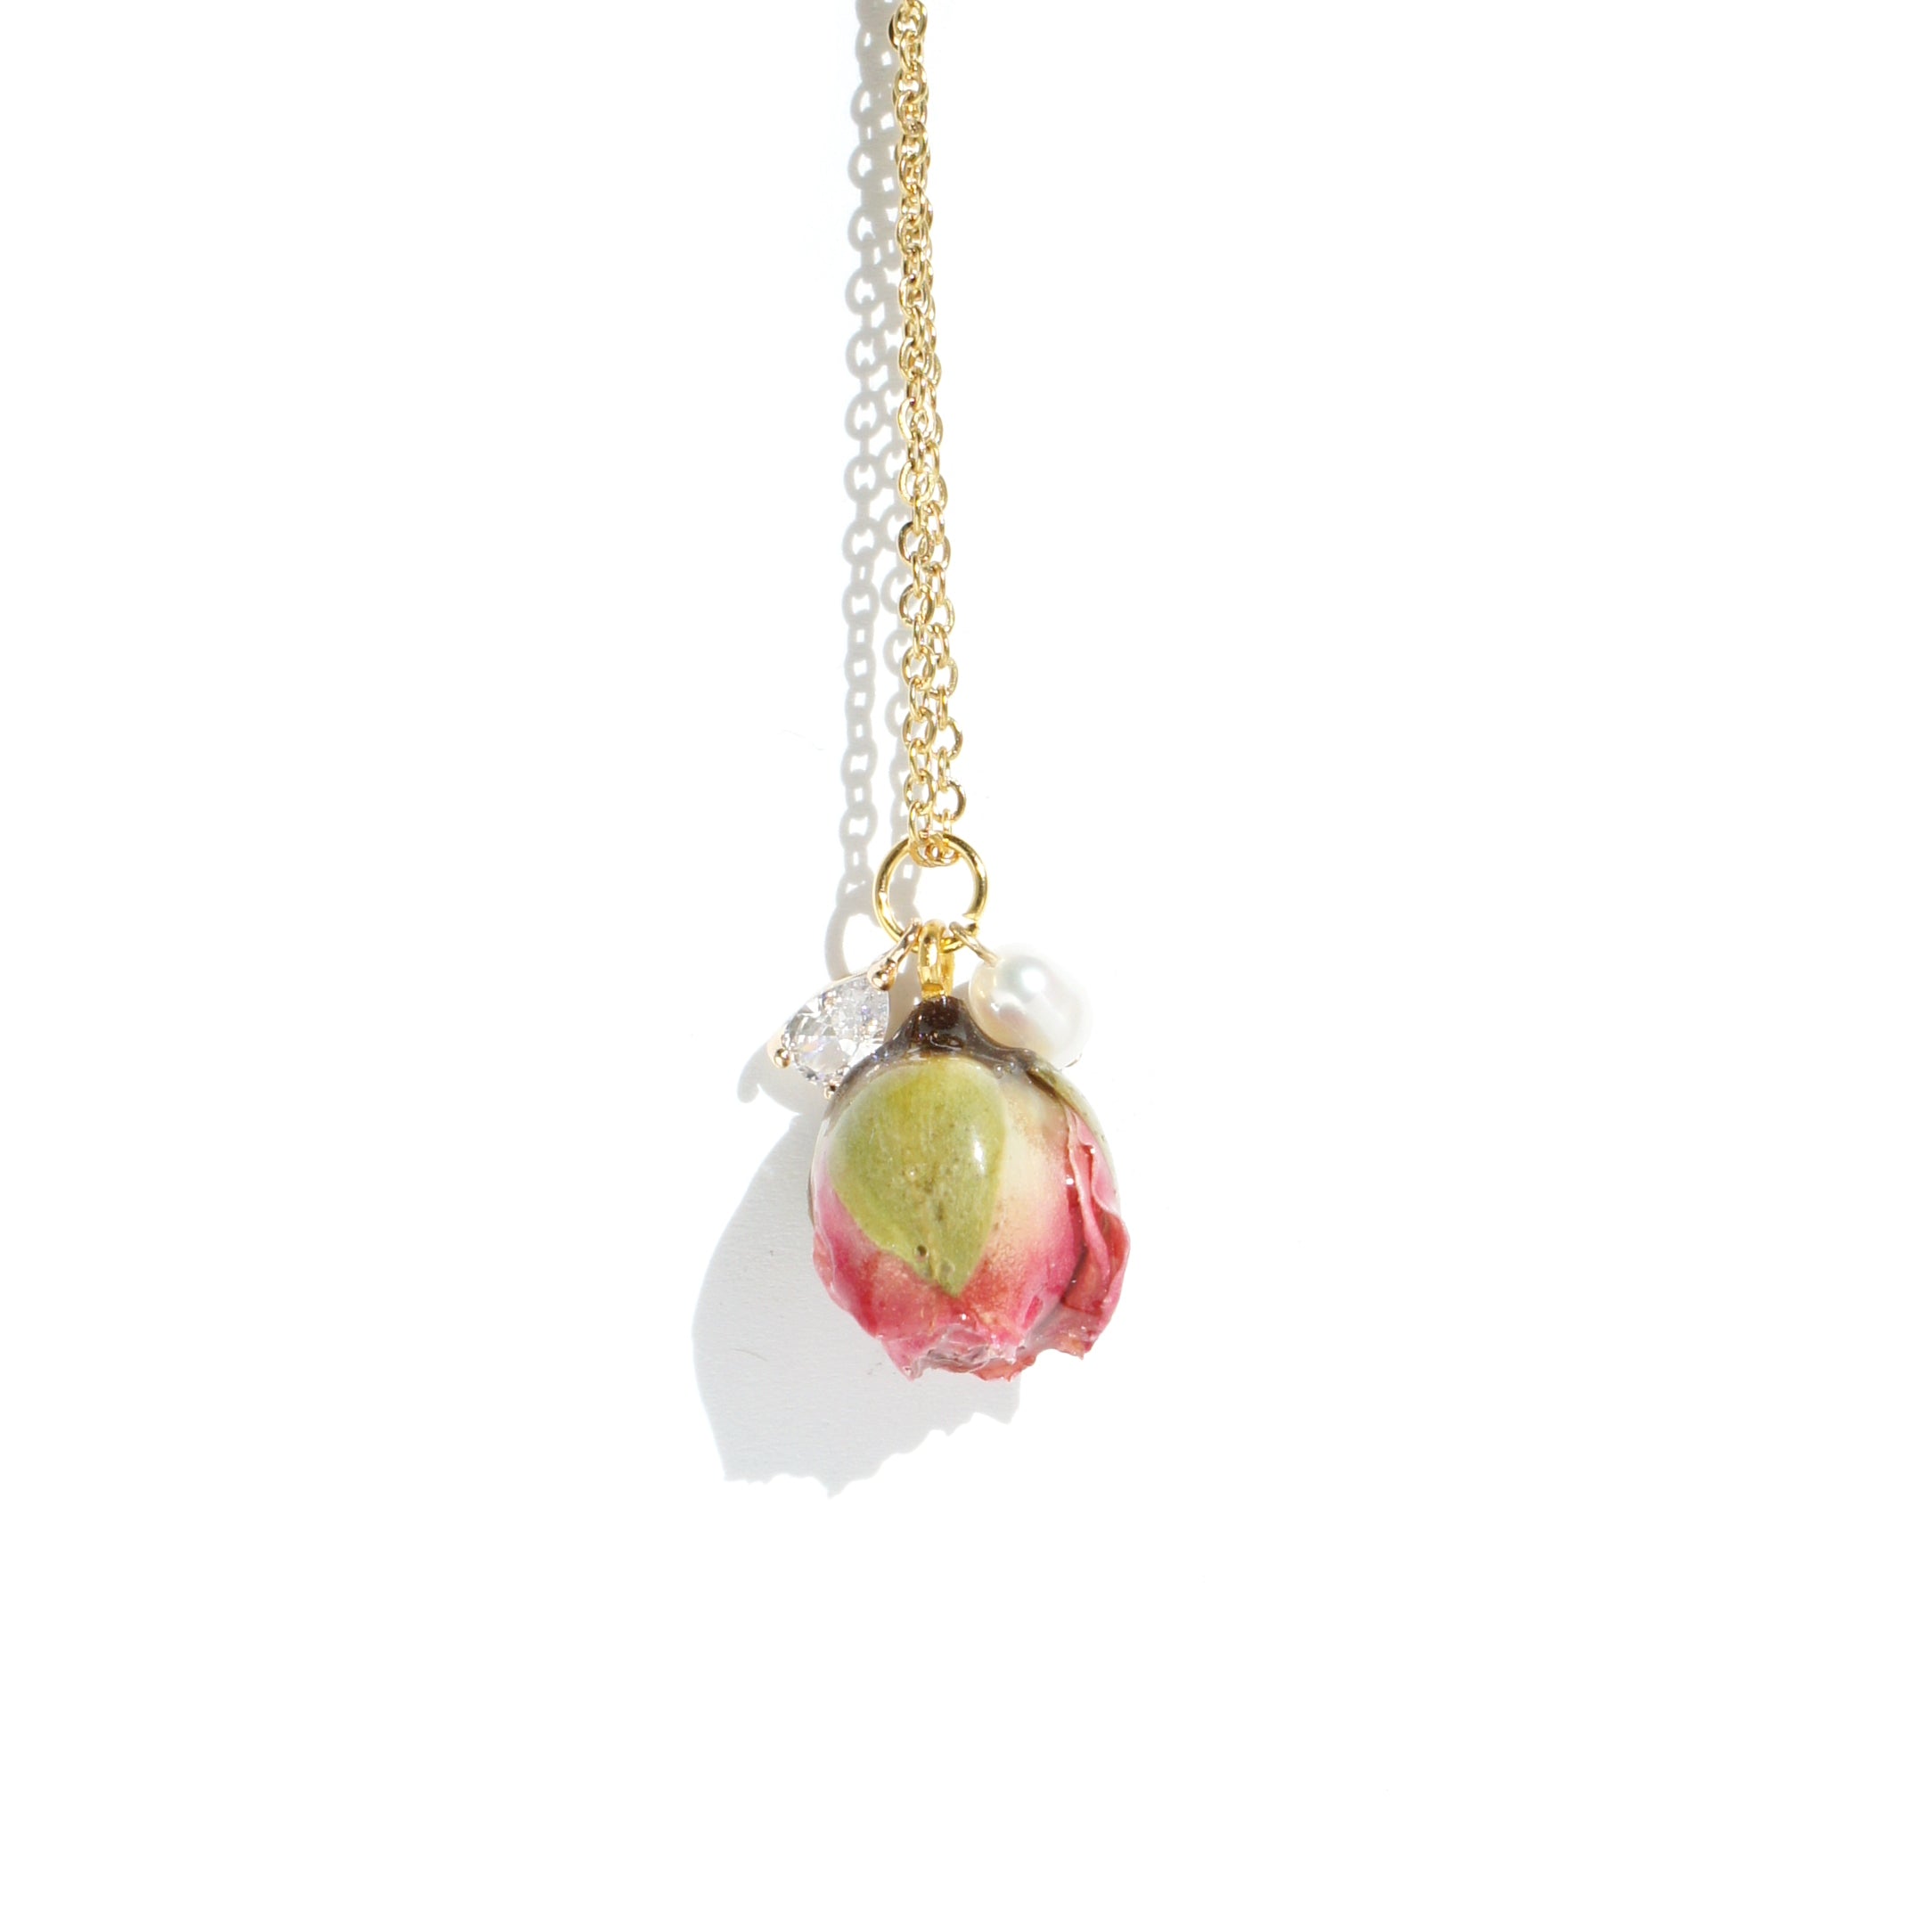 *REAL FLOWER* Ingrid Chain Necklace with Rosebud, Crystal and Pearl Pendants